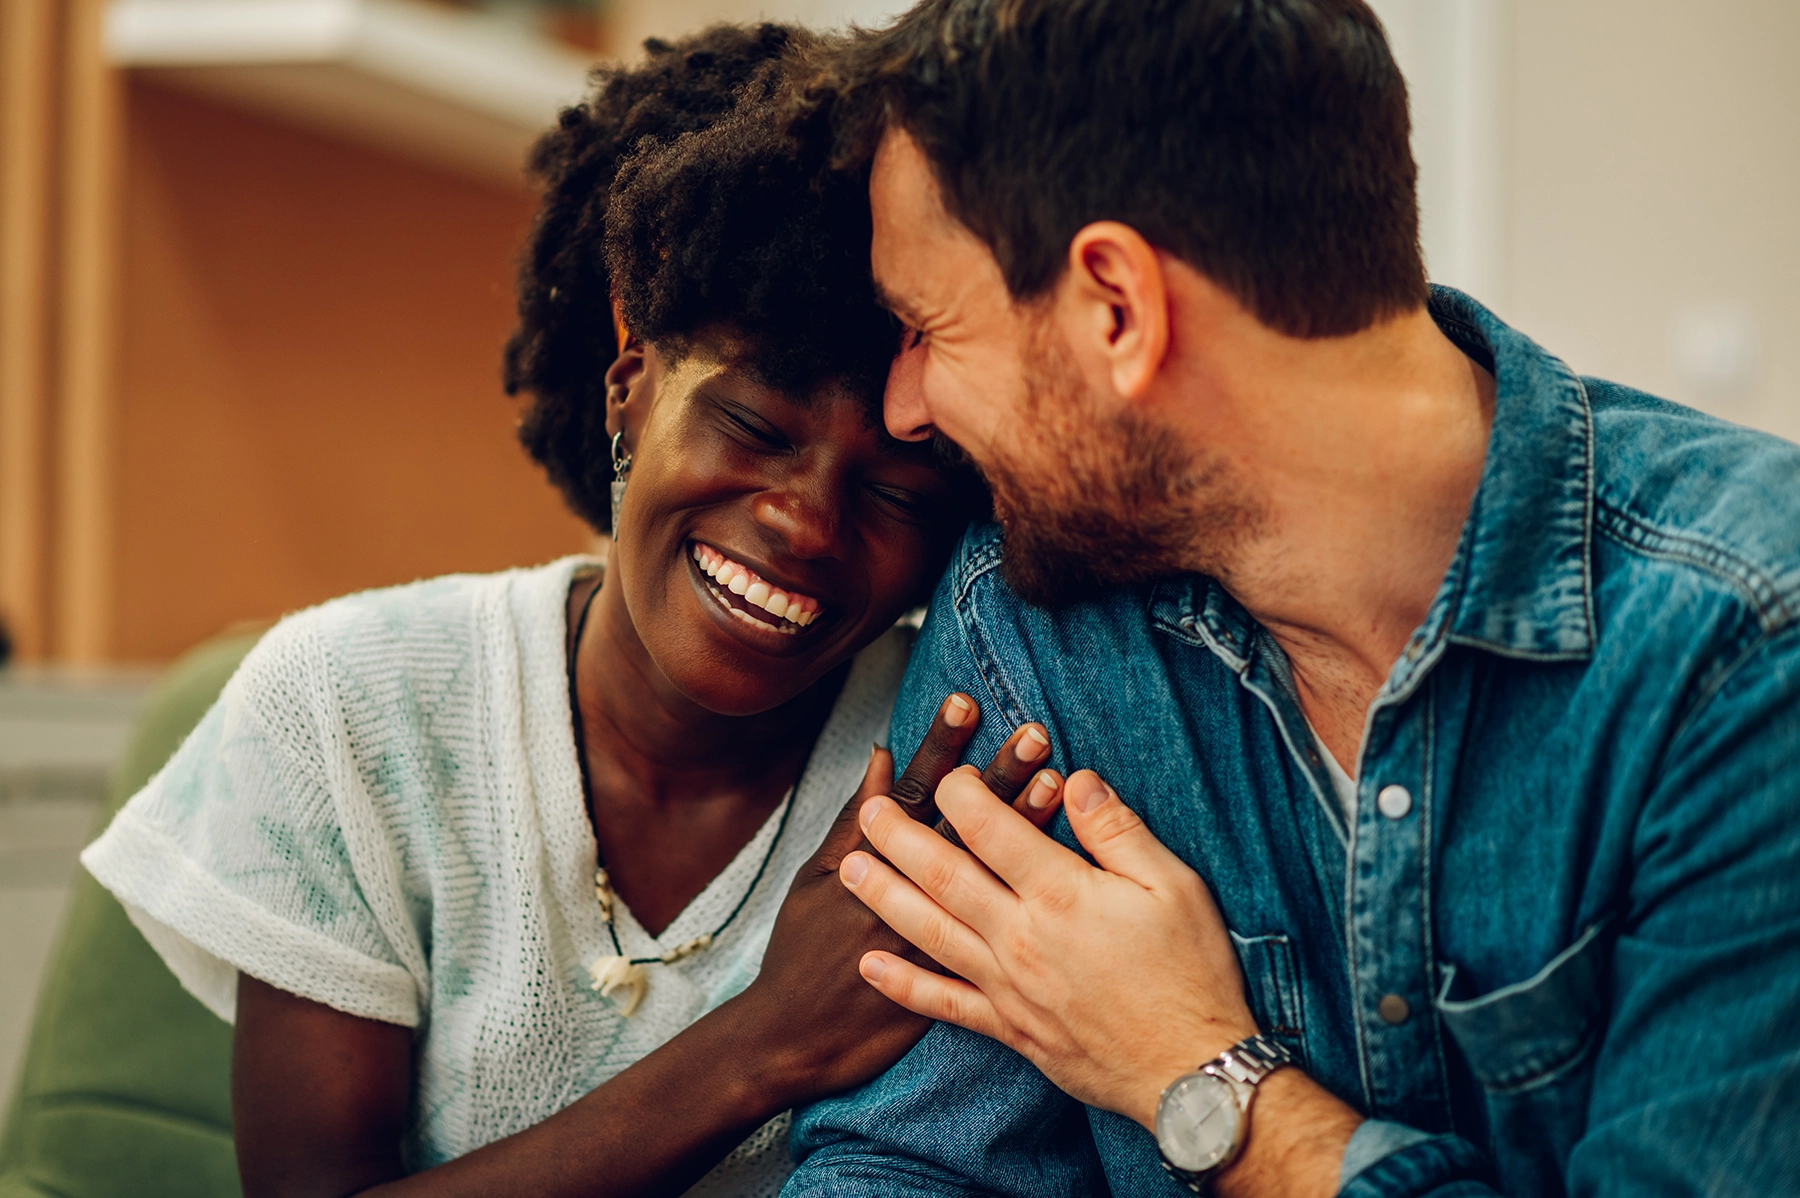 Smiling, diverse couple clasps hands and hugs on a couch.